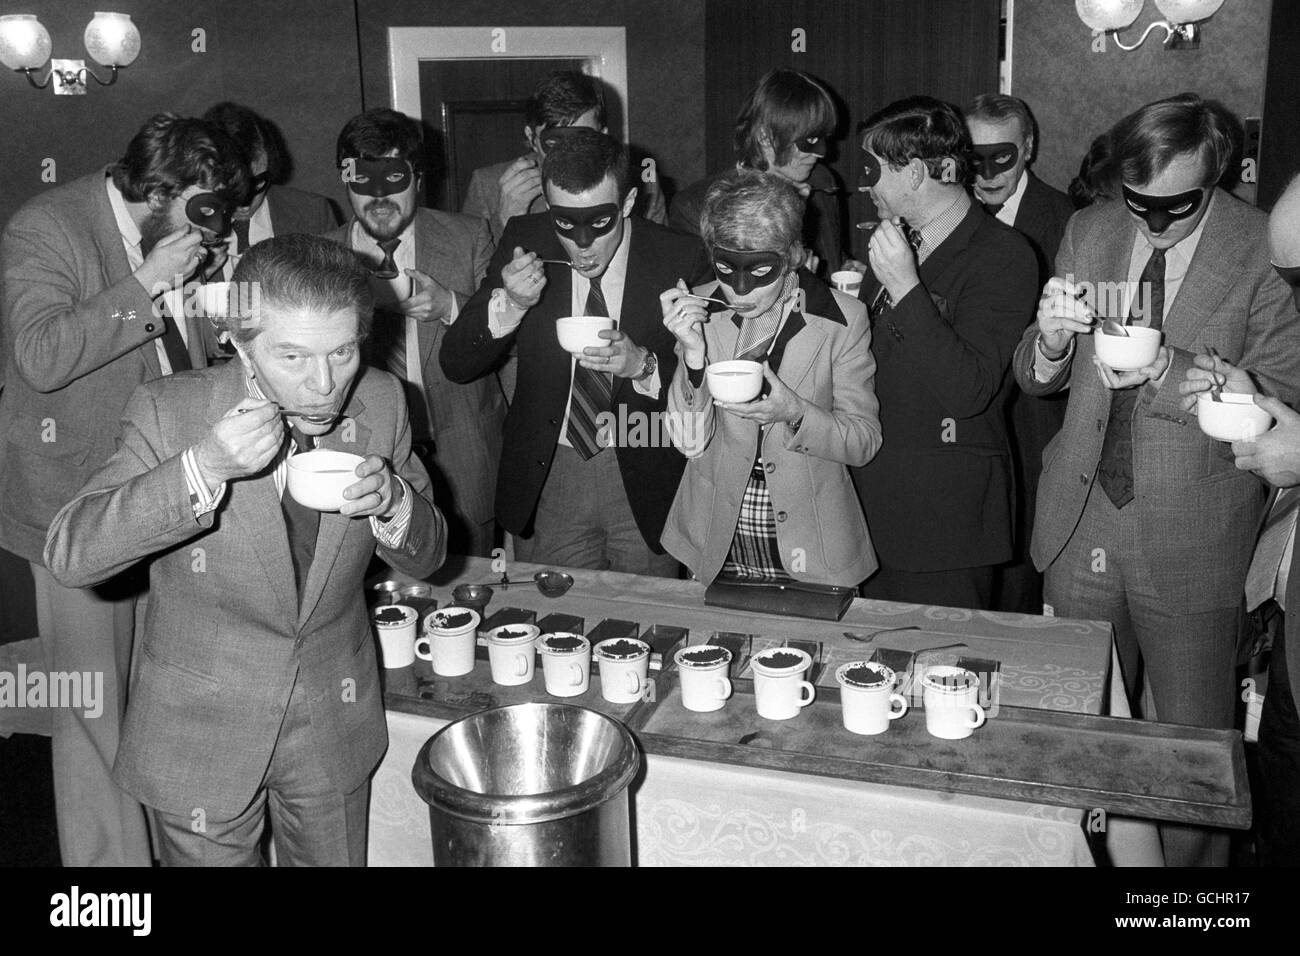 At a hotel in London today, gourmet Egon Ronay (foreground) and his inspectors - masked to elude future recognition - refresh their palates in the art of tea-tasting and blending in a session arranged by the Tea Council. Stock Photo